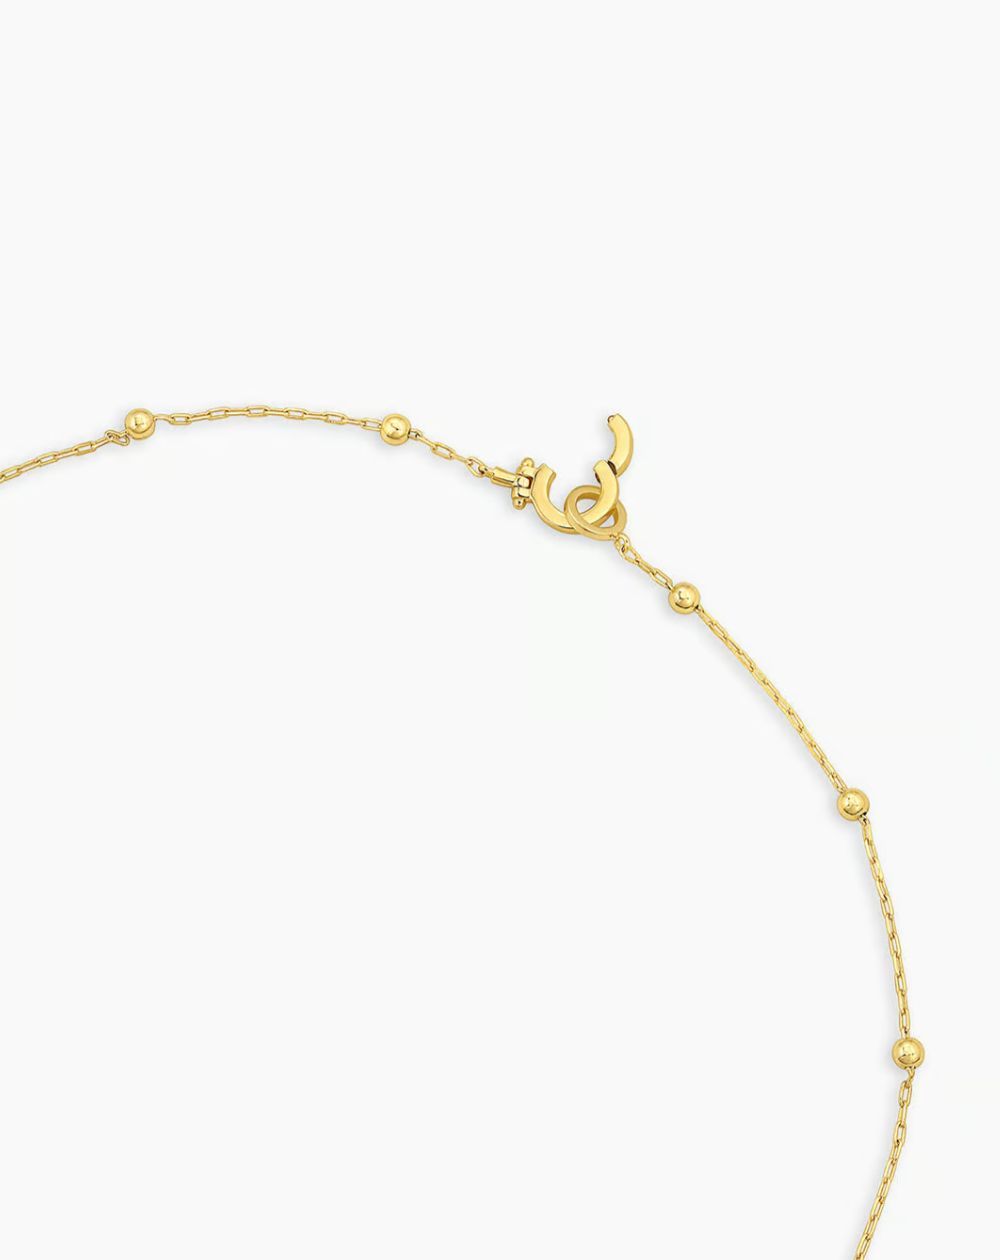 Newport chain necklace - gold